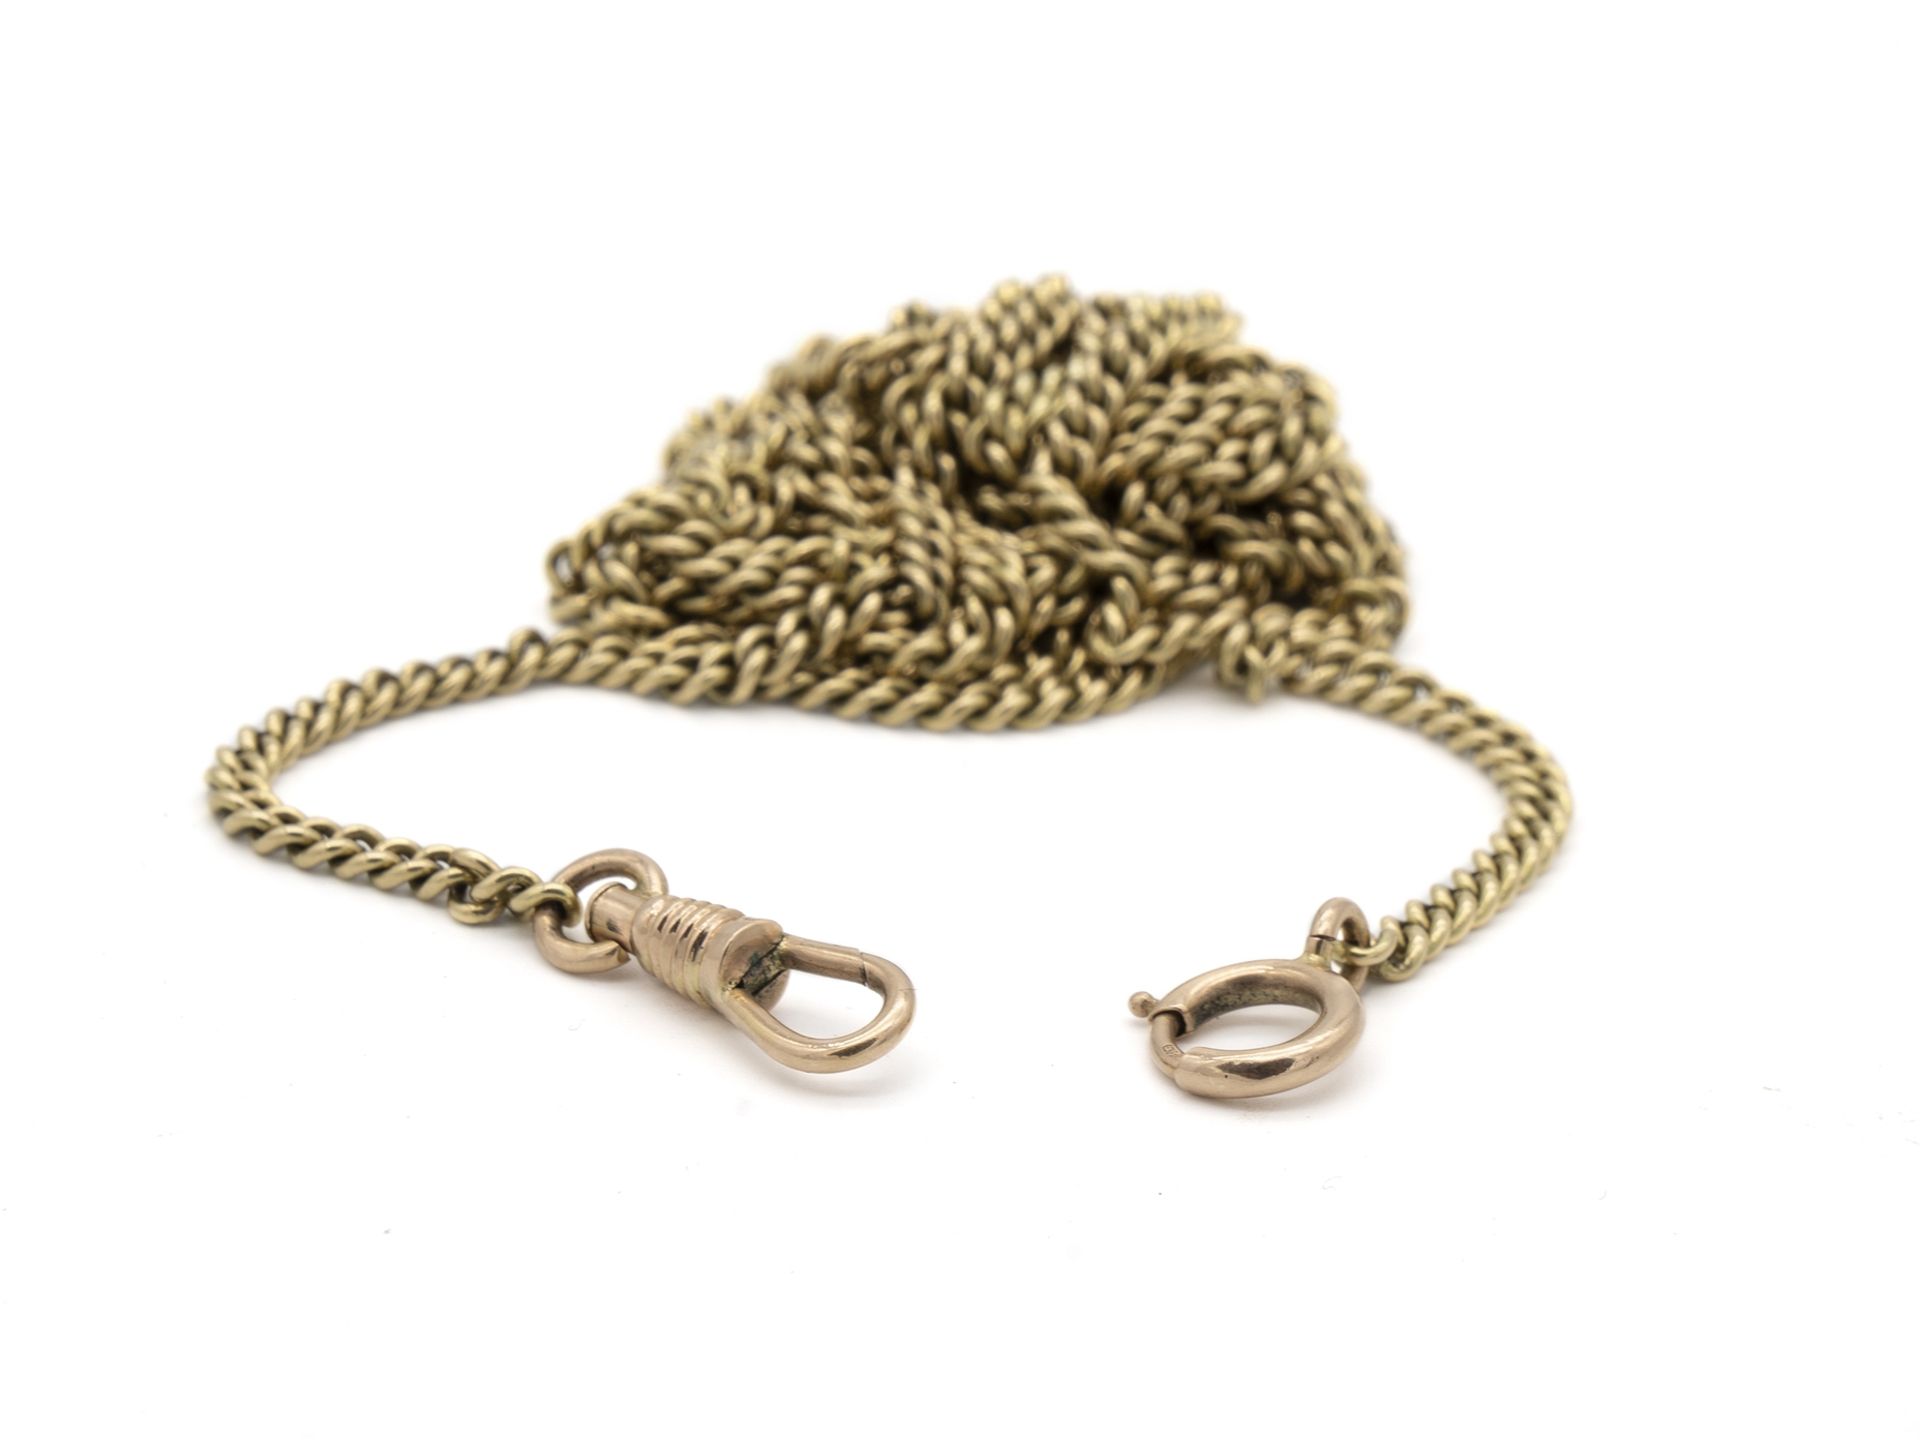 Long watch chain in 14 K, 585 gold, around 1880 - Image 3 of 4